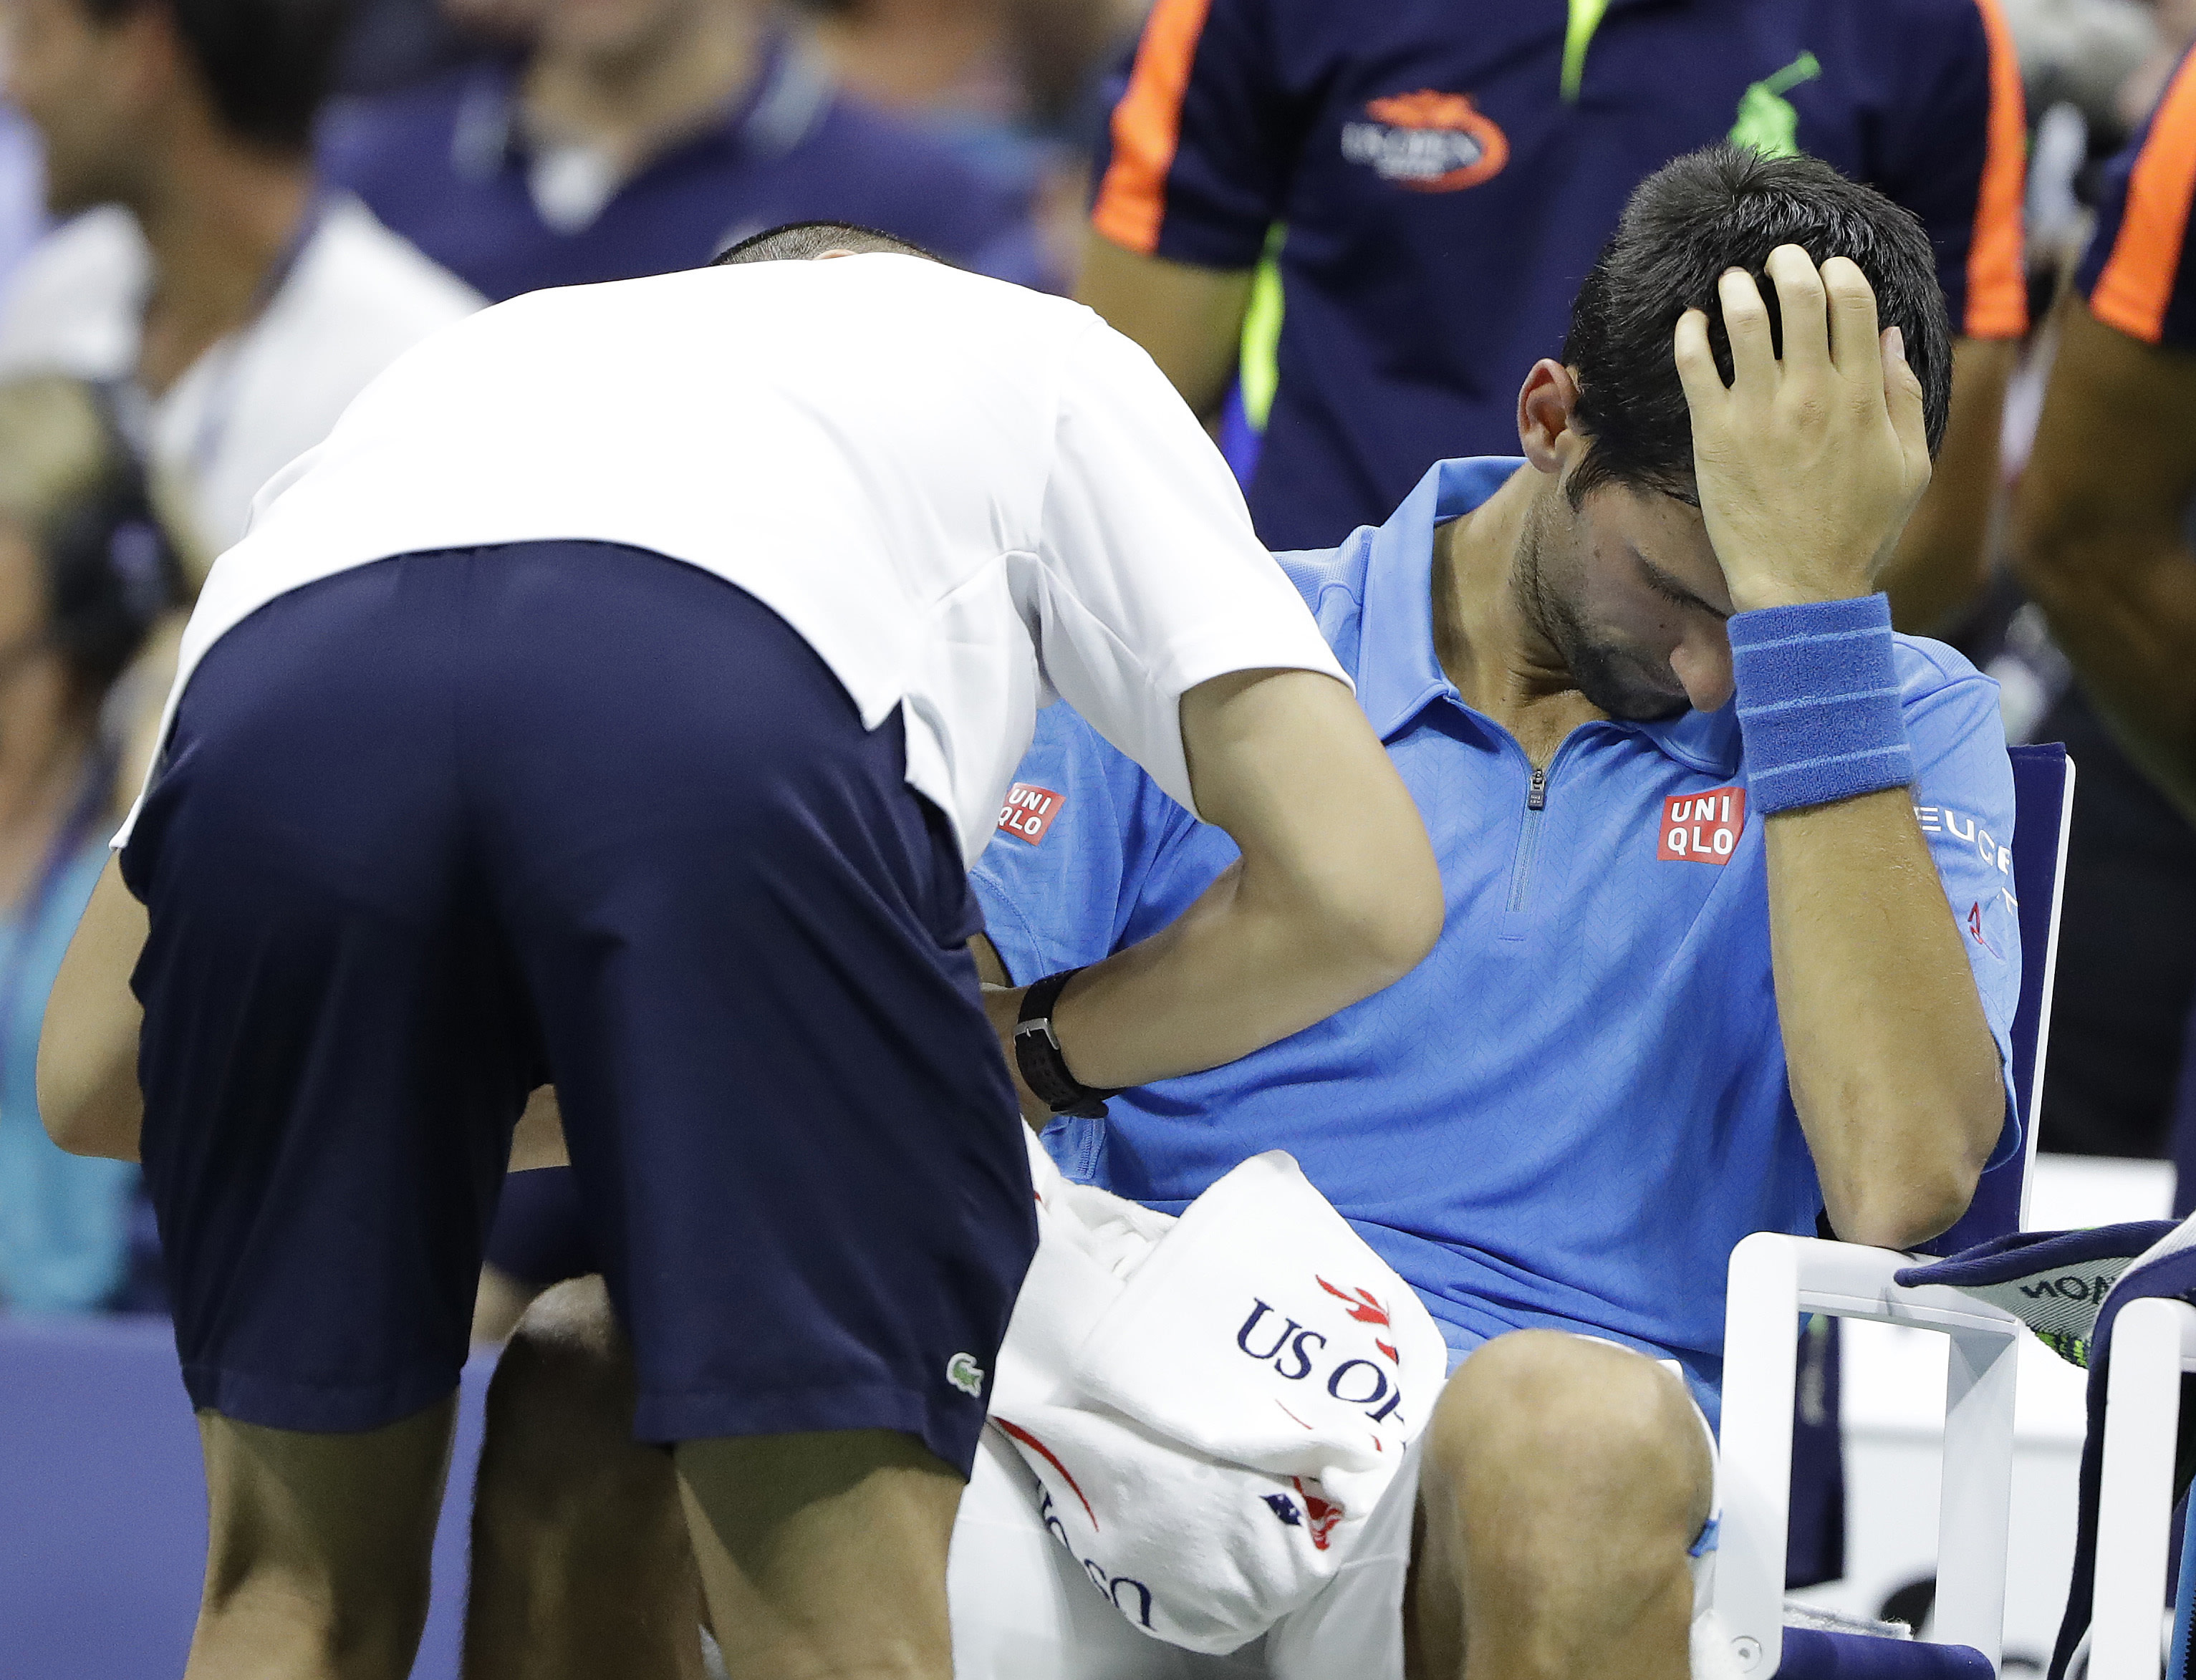 Novak Djokovic's right arm gives him trouble during U.S. Open win